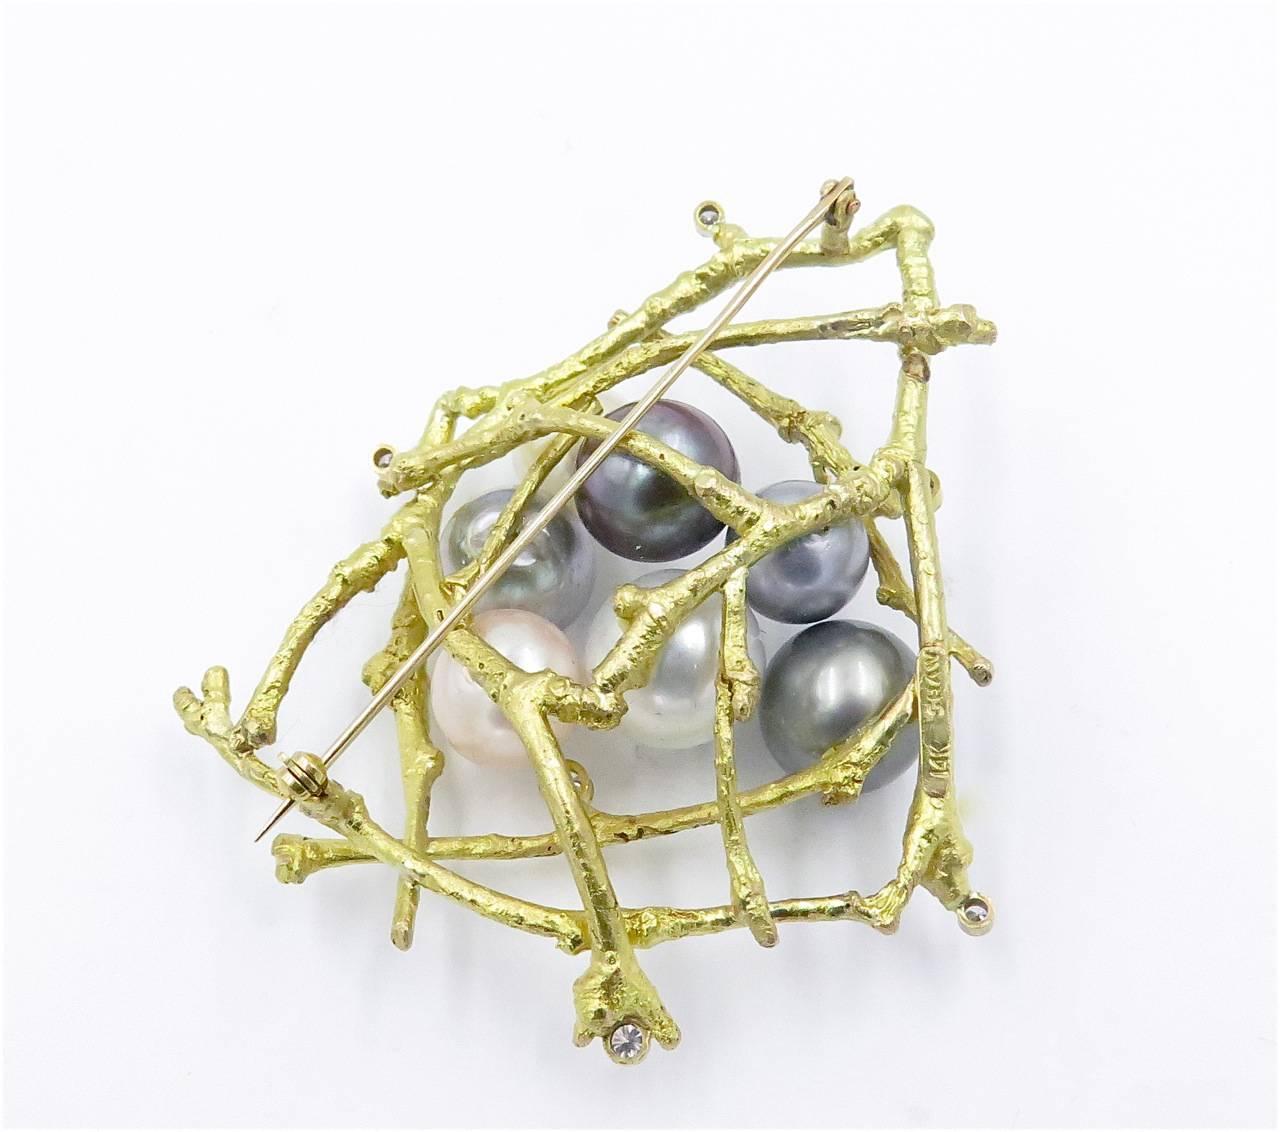 A 14K yellow gold and white South Sea, Tahitian cultured pearl and diamond Twig Nest brooch. Sam Shaw. Circa 1980.  Designed as a textured gold geometric nest, centering white South Sea cultured pearls and gray Tahitian cultured pearls of various